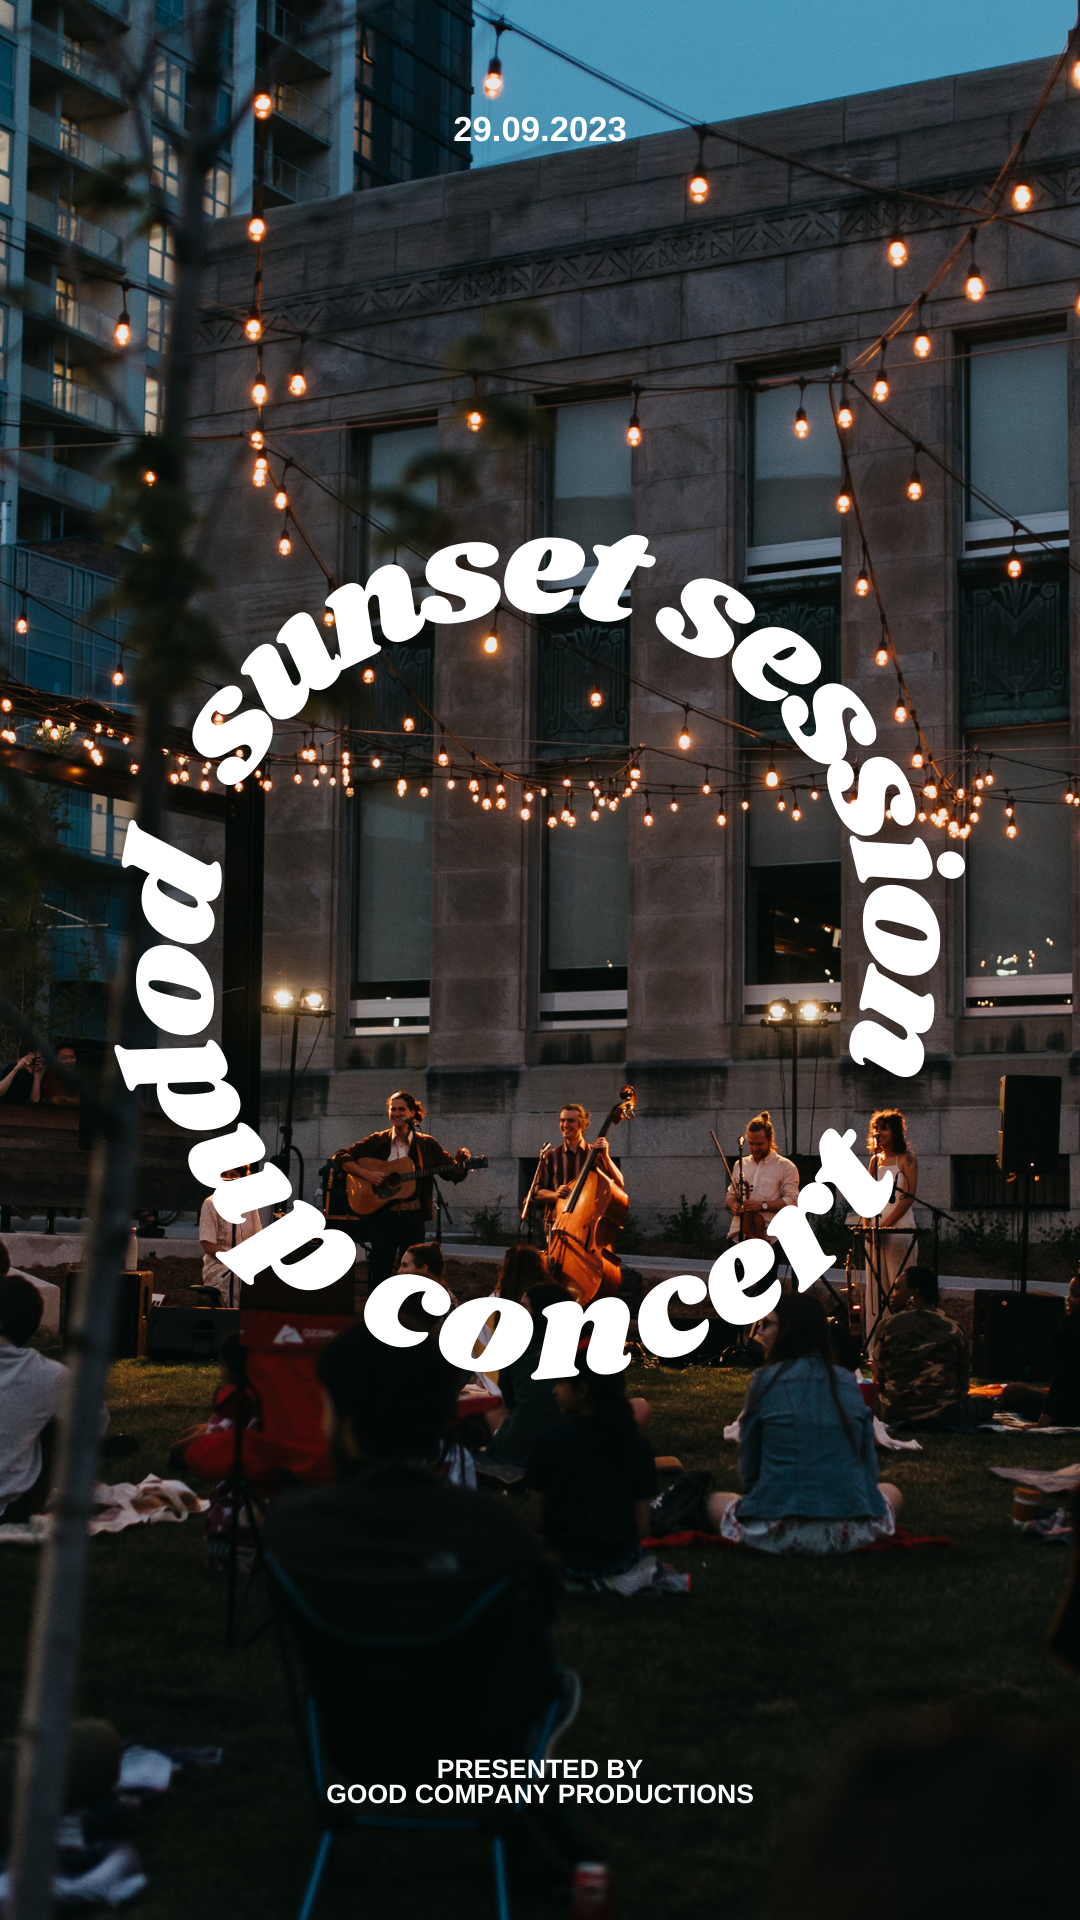 Sunset Sessions: Free Popup Concert (September 29, 2023)